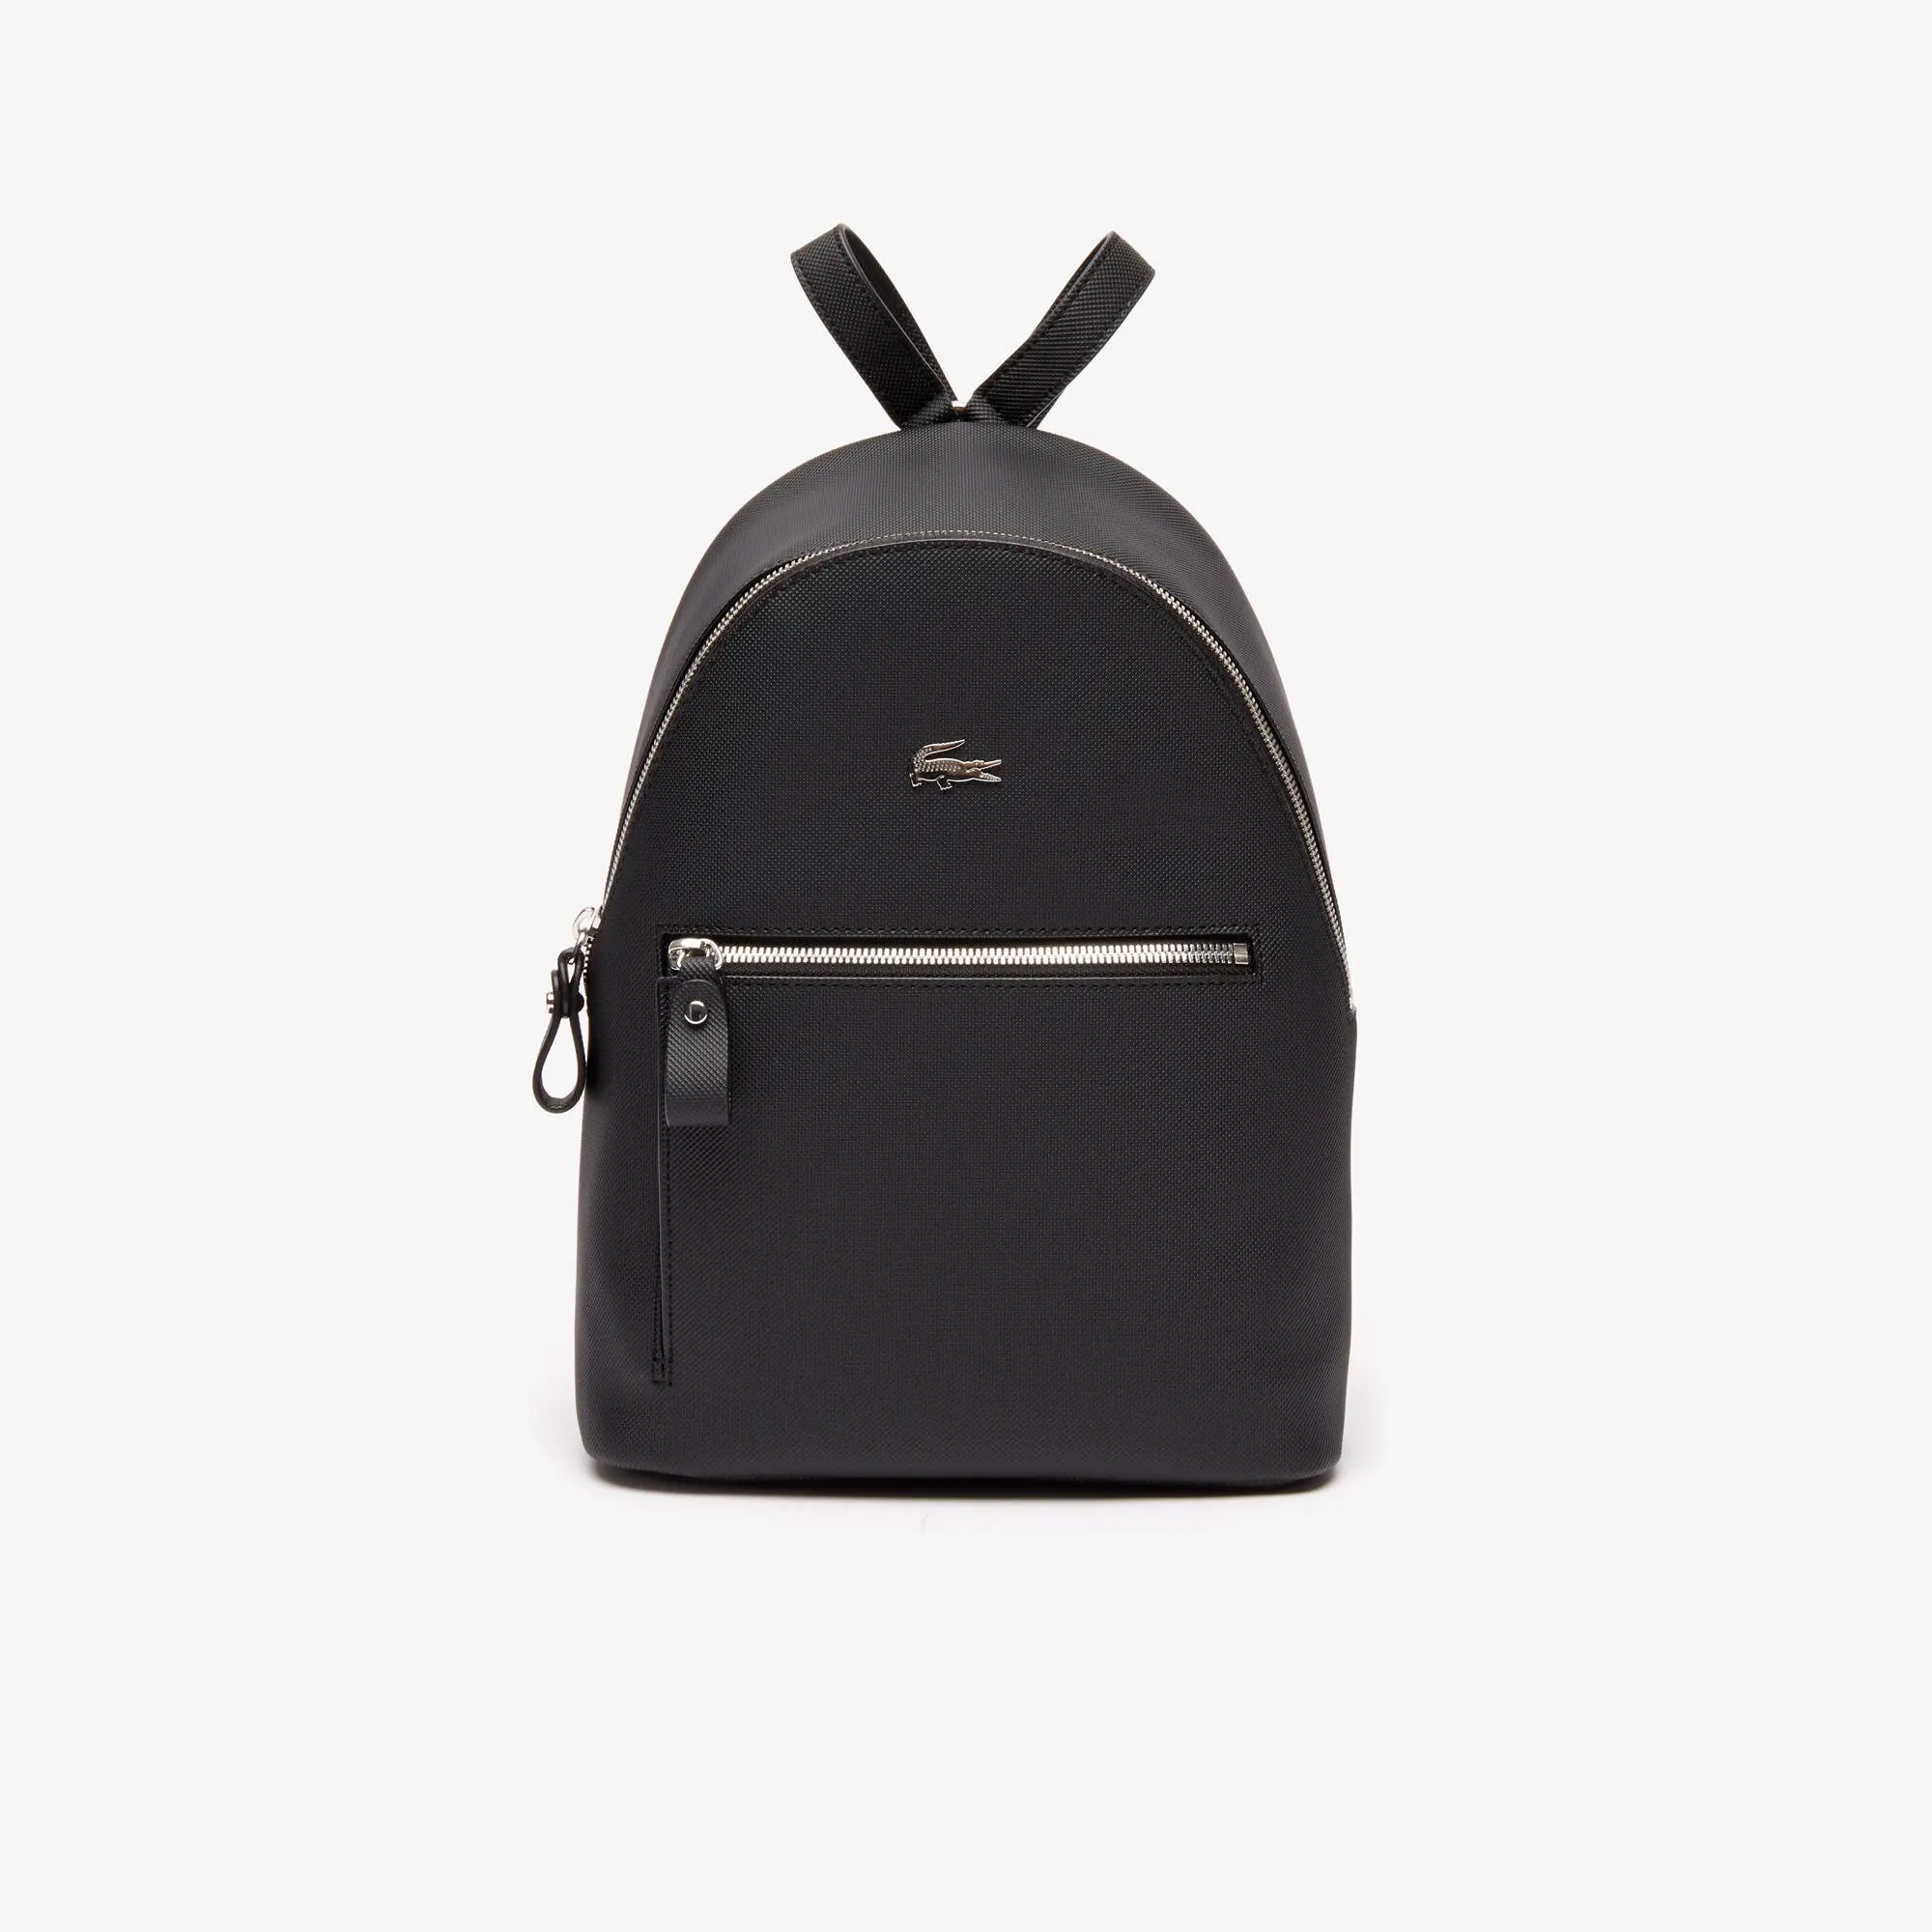 Lacoste Women's Daily Classic Piqué Canvas Backpack. 2